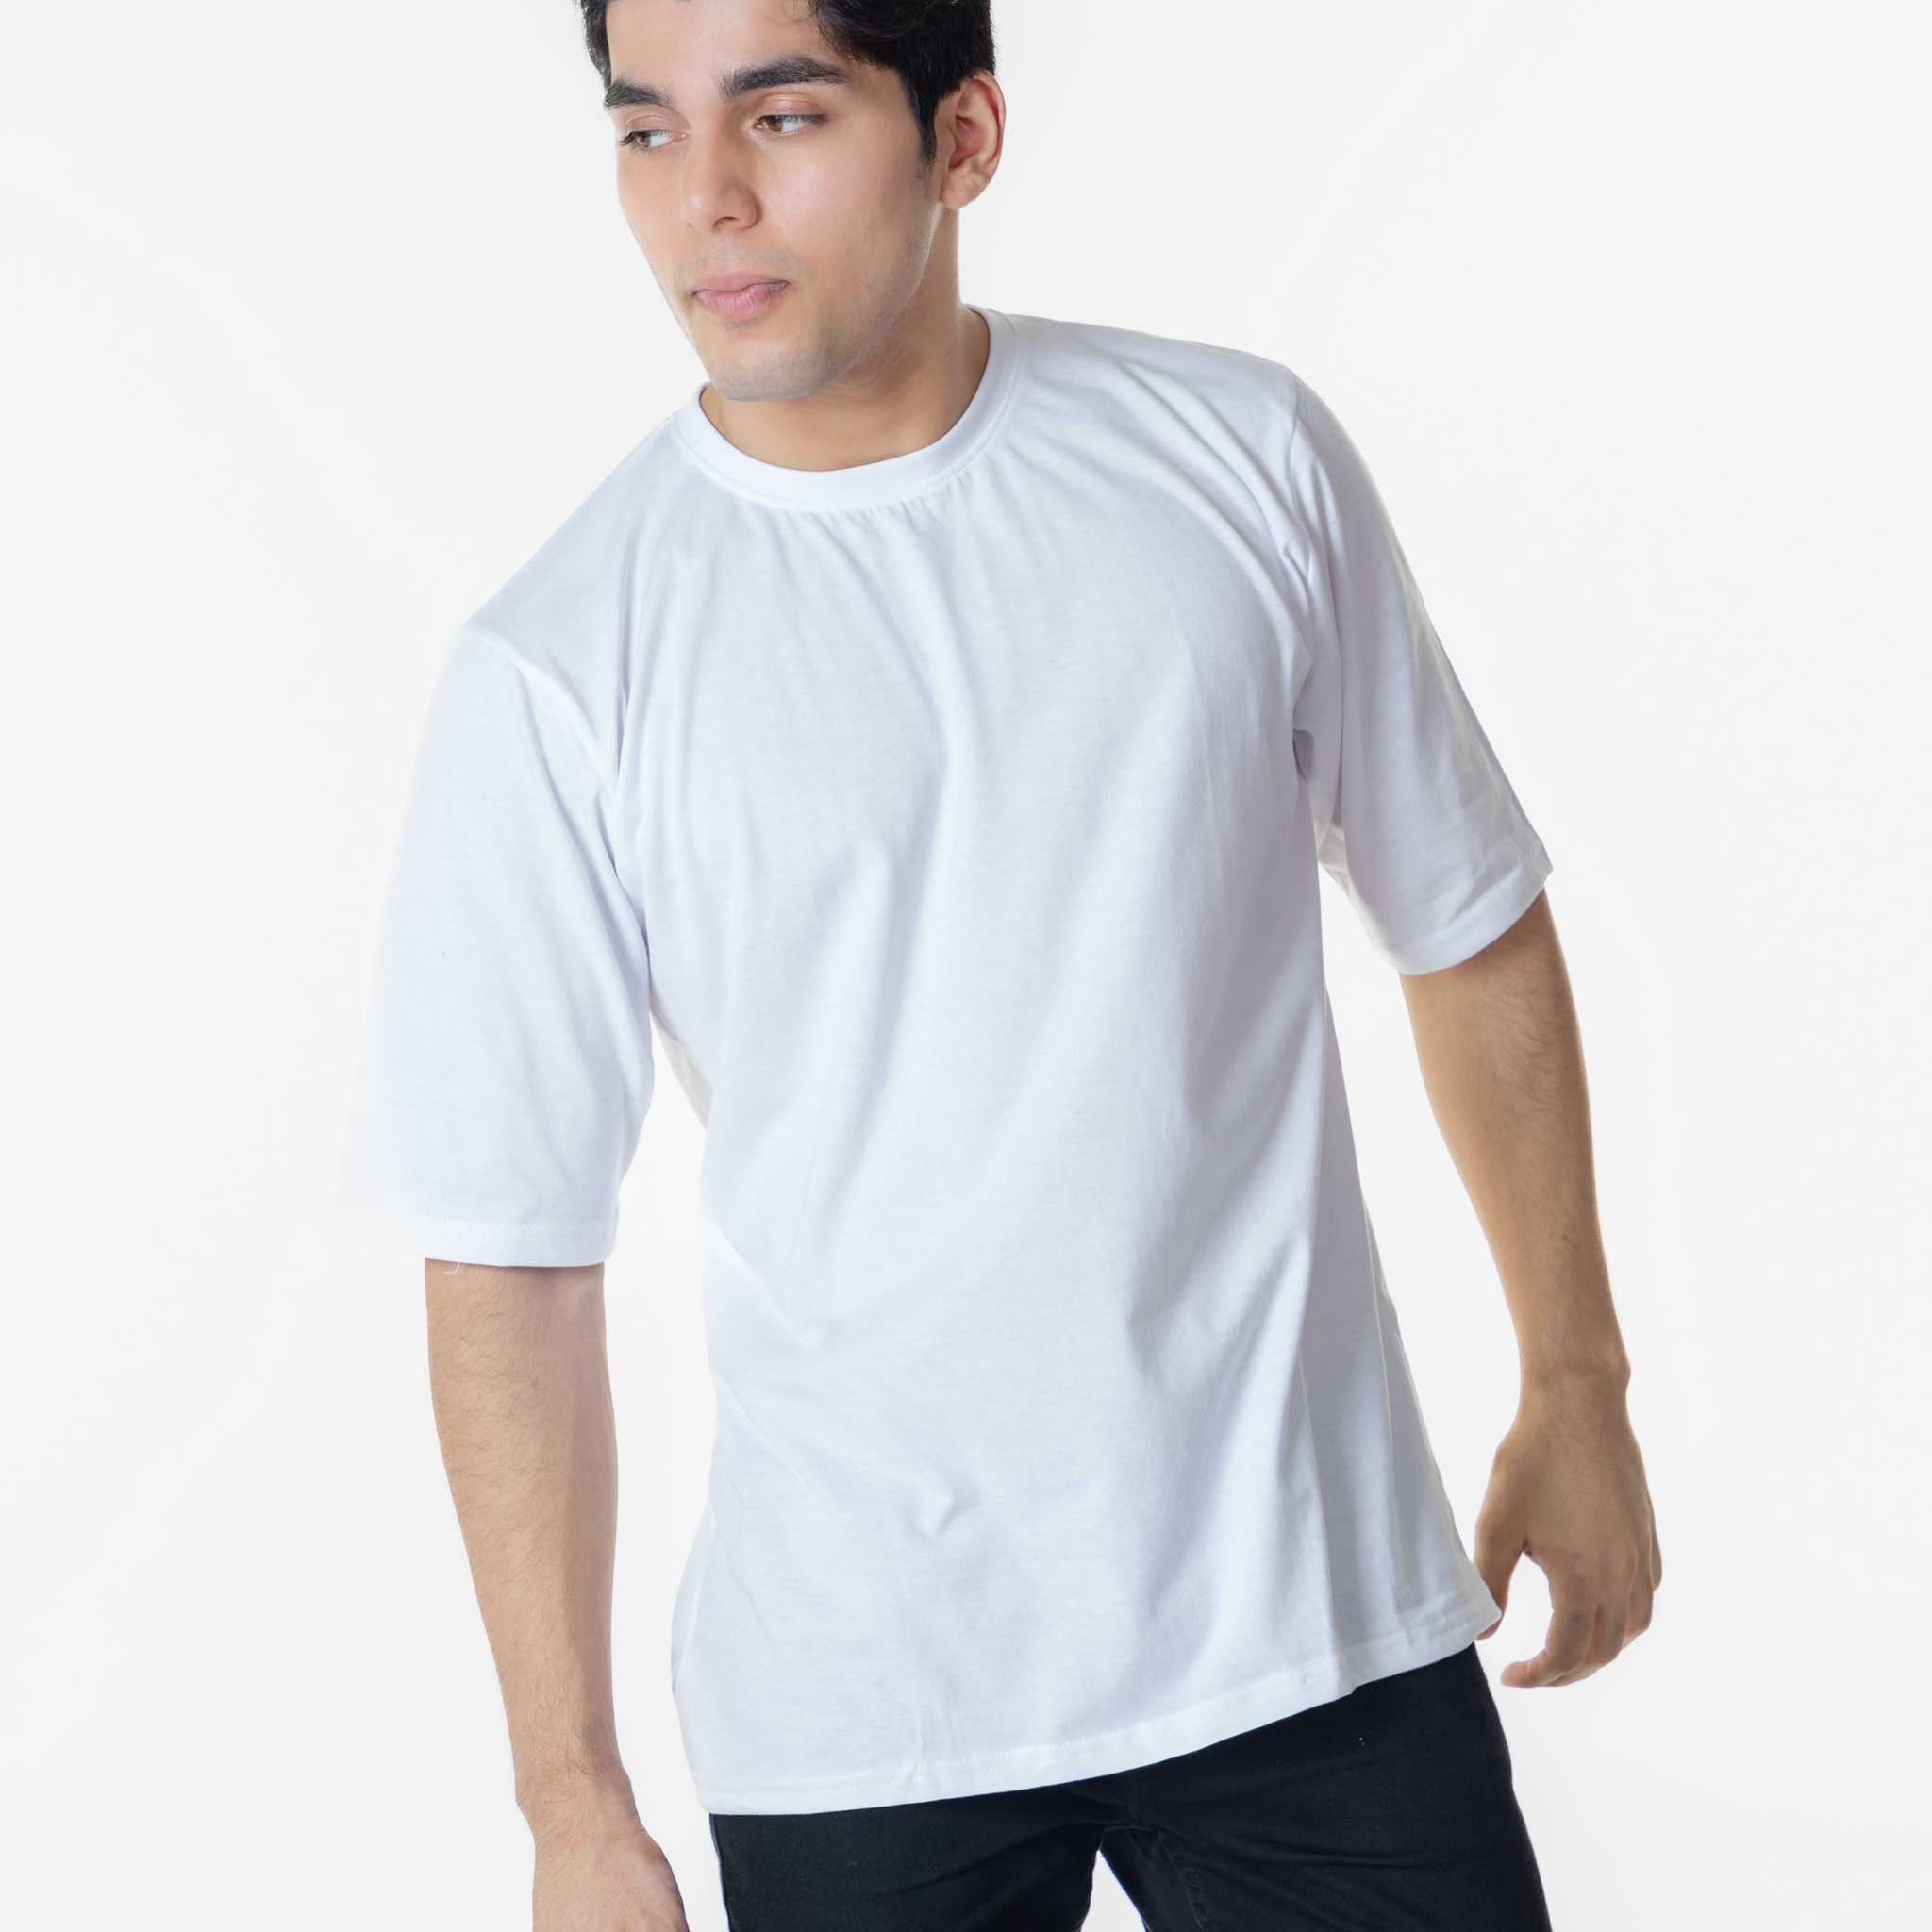 Oversized White Solid T-shirt Crew Cut/Round Neck Elbow length Sleeves